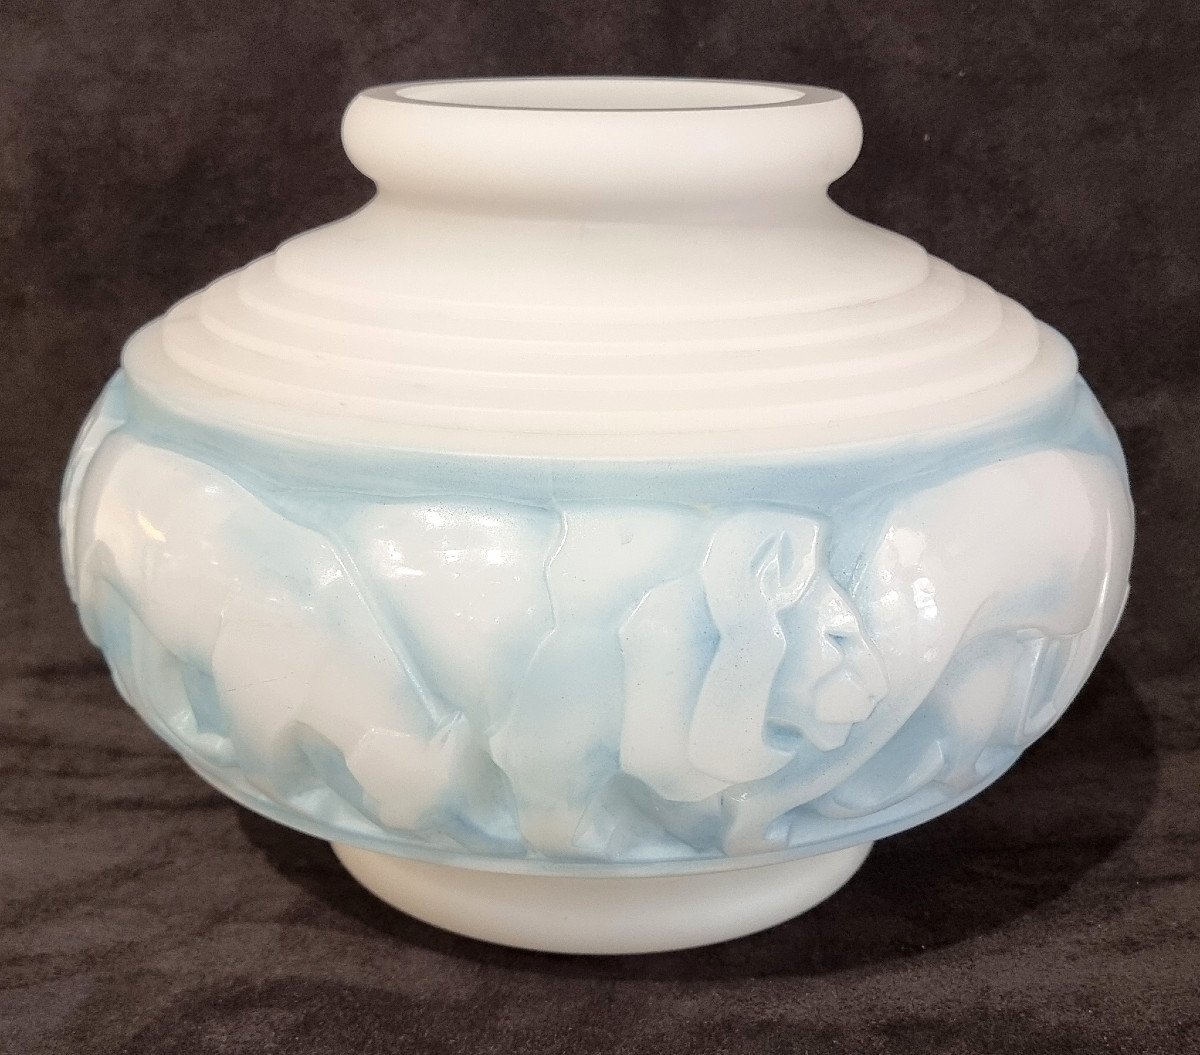 Pierre d'Avesn Lions Vase Lionesses Art Deco 1930 White Glass With Blue Patina